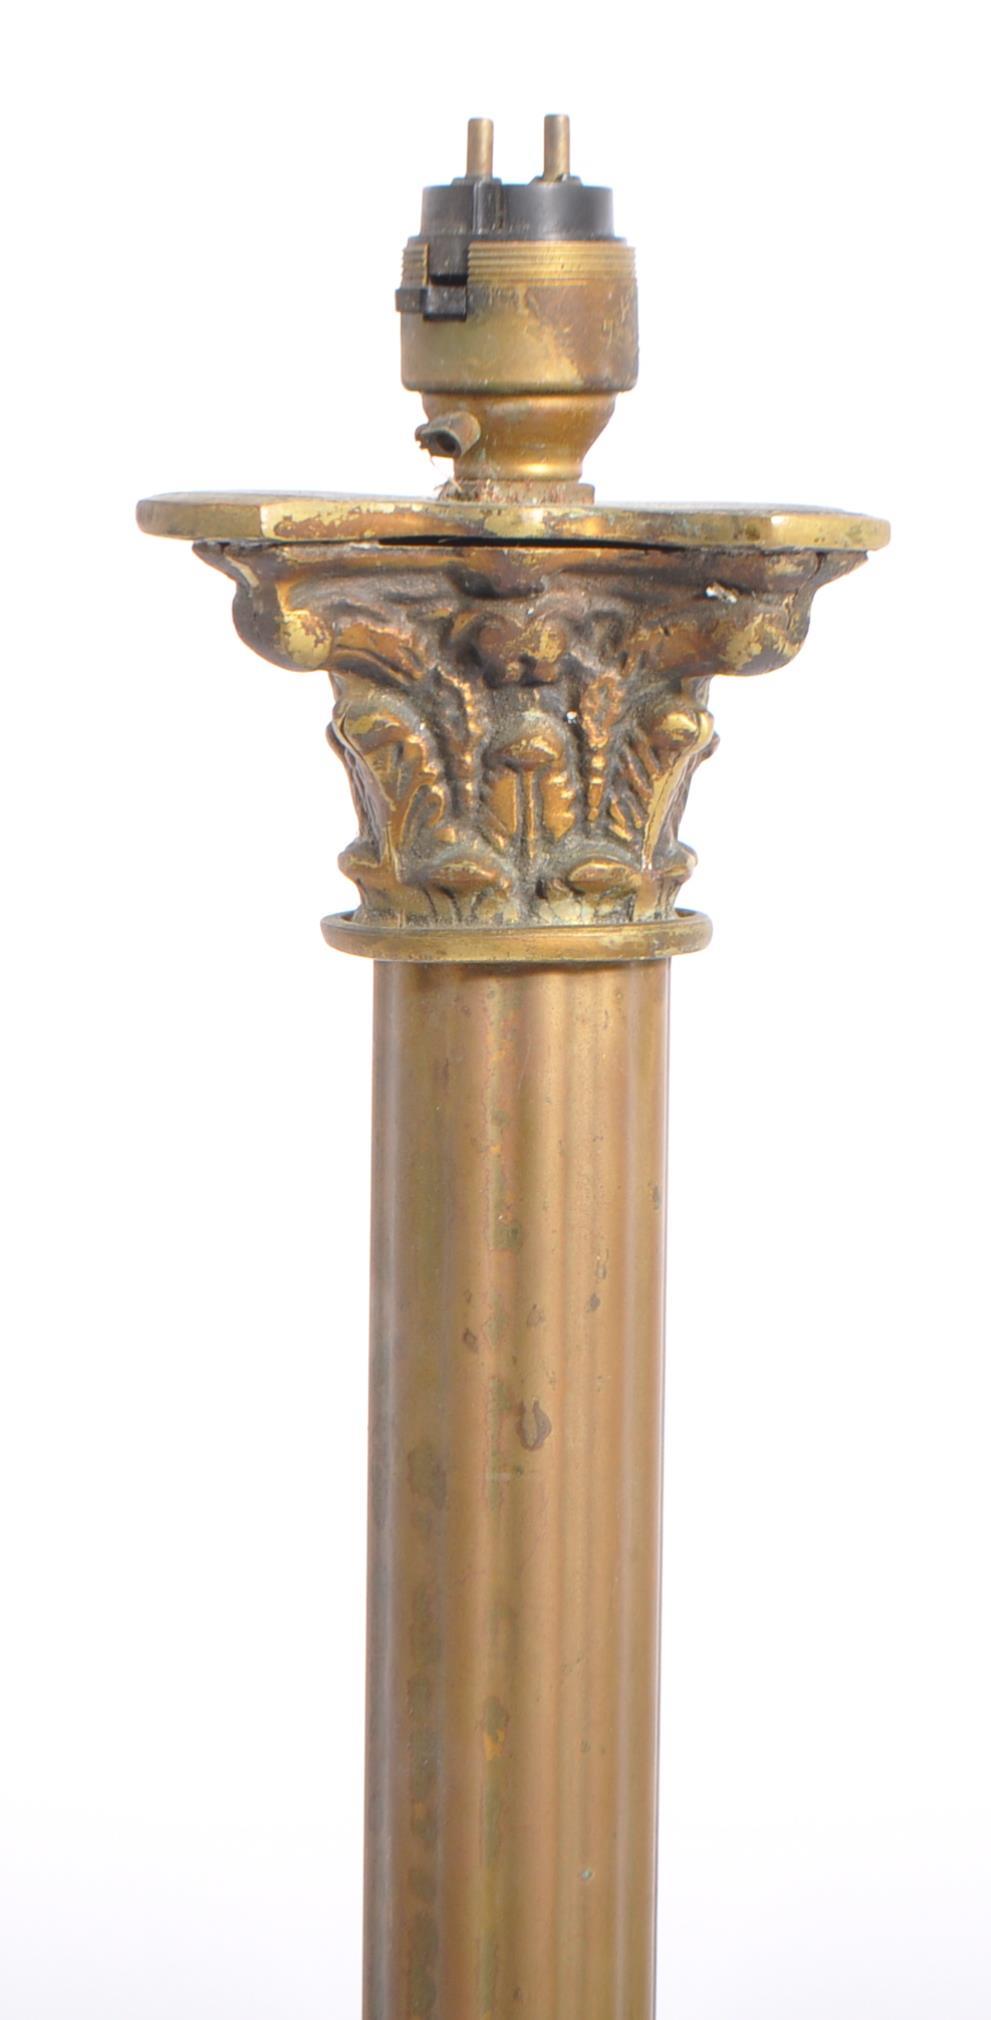 NEO CLASSICAL VINTAGE BRASS COLUMN TABLE LAMP LIGHT - Image 3 of 3